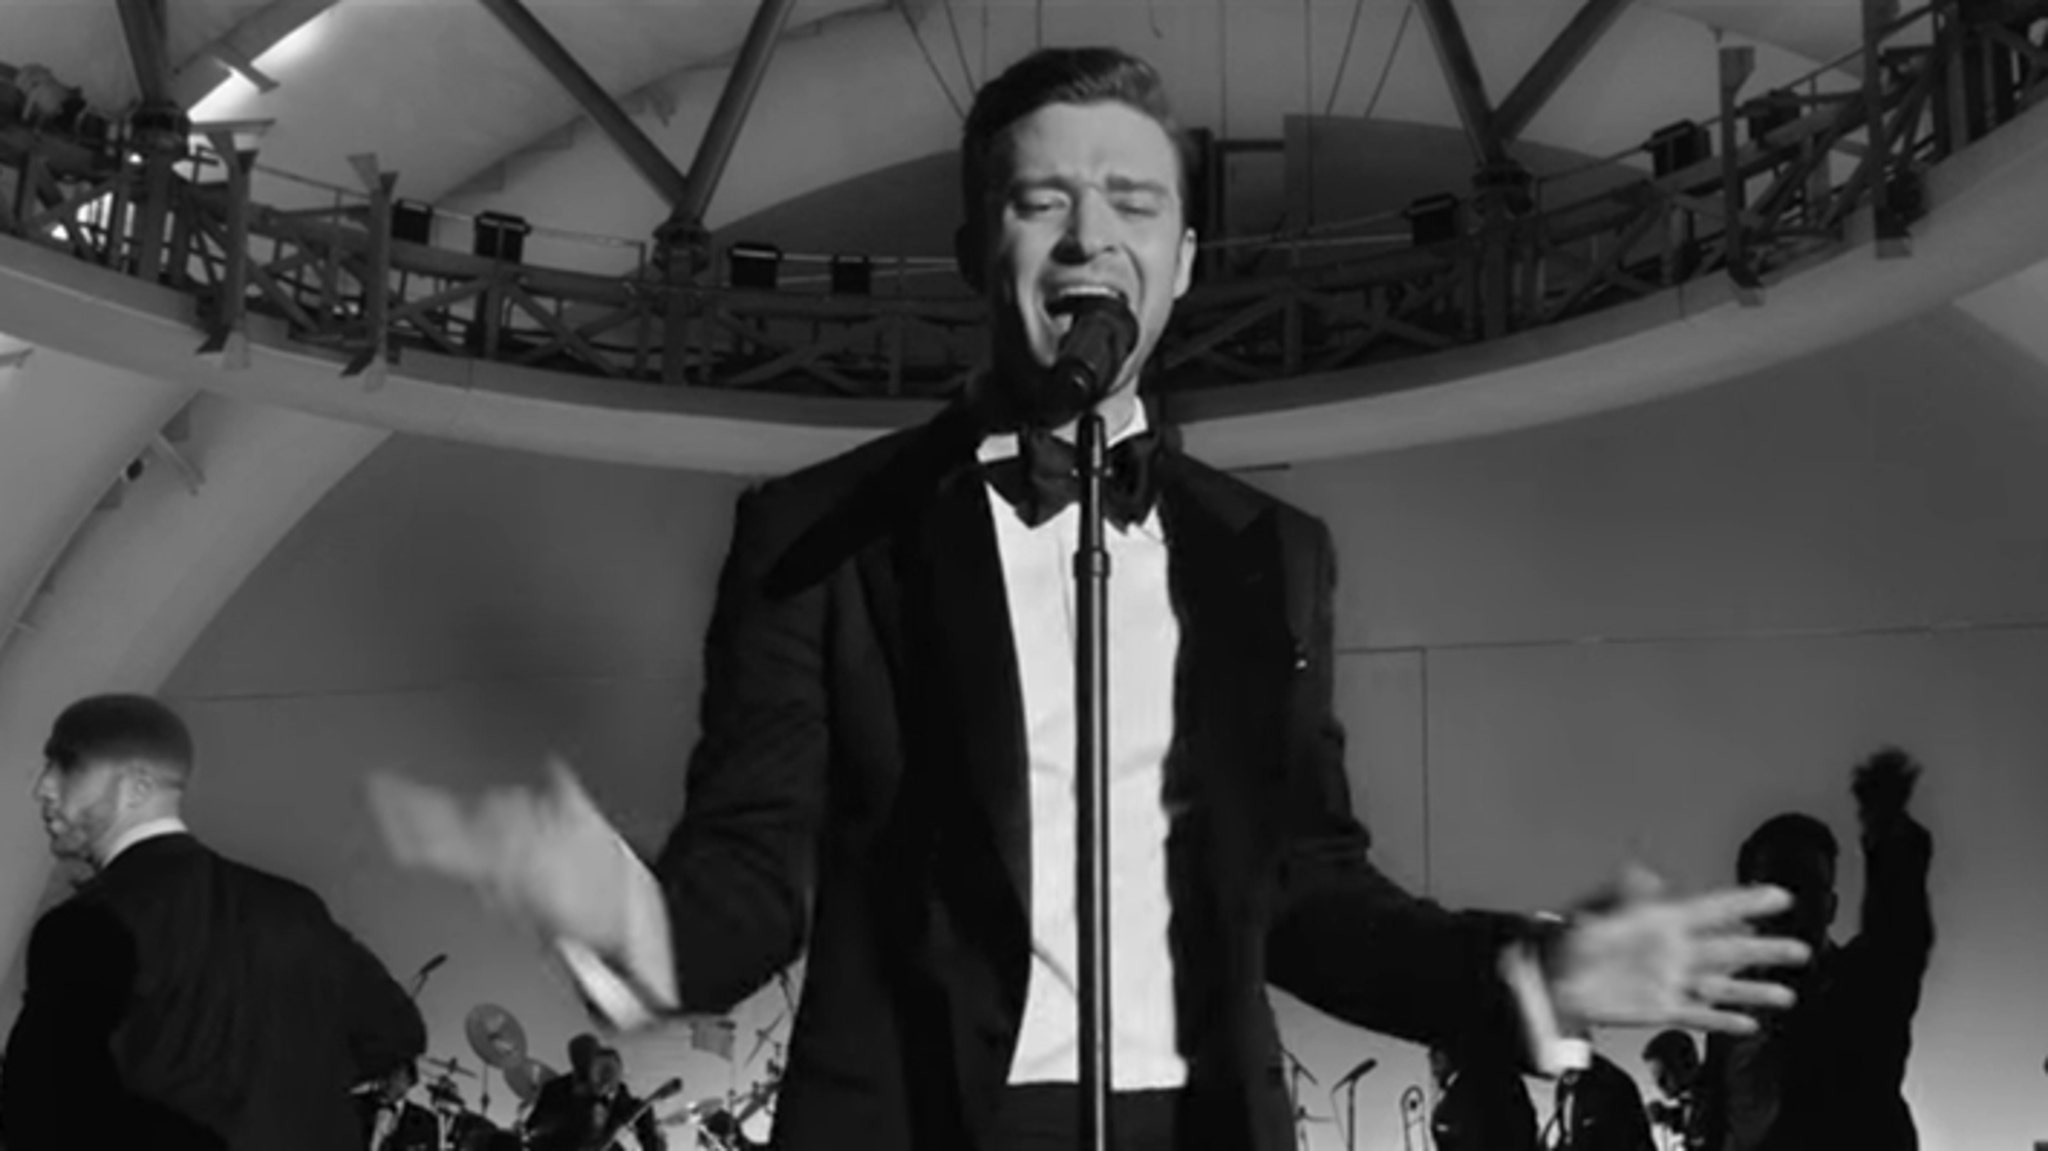 suit and tie justin timberlake mp3 download